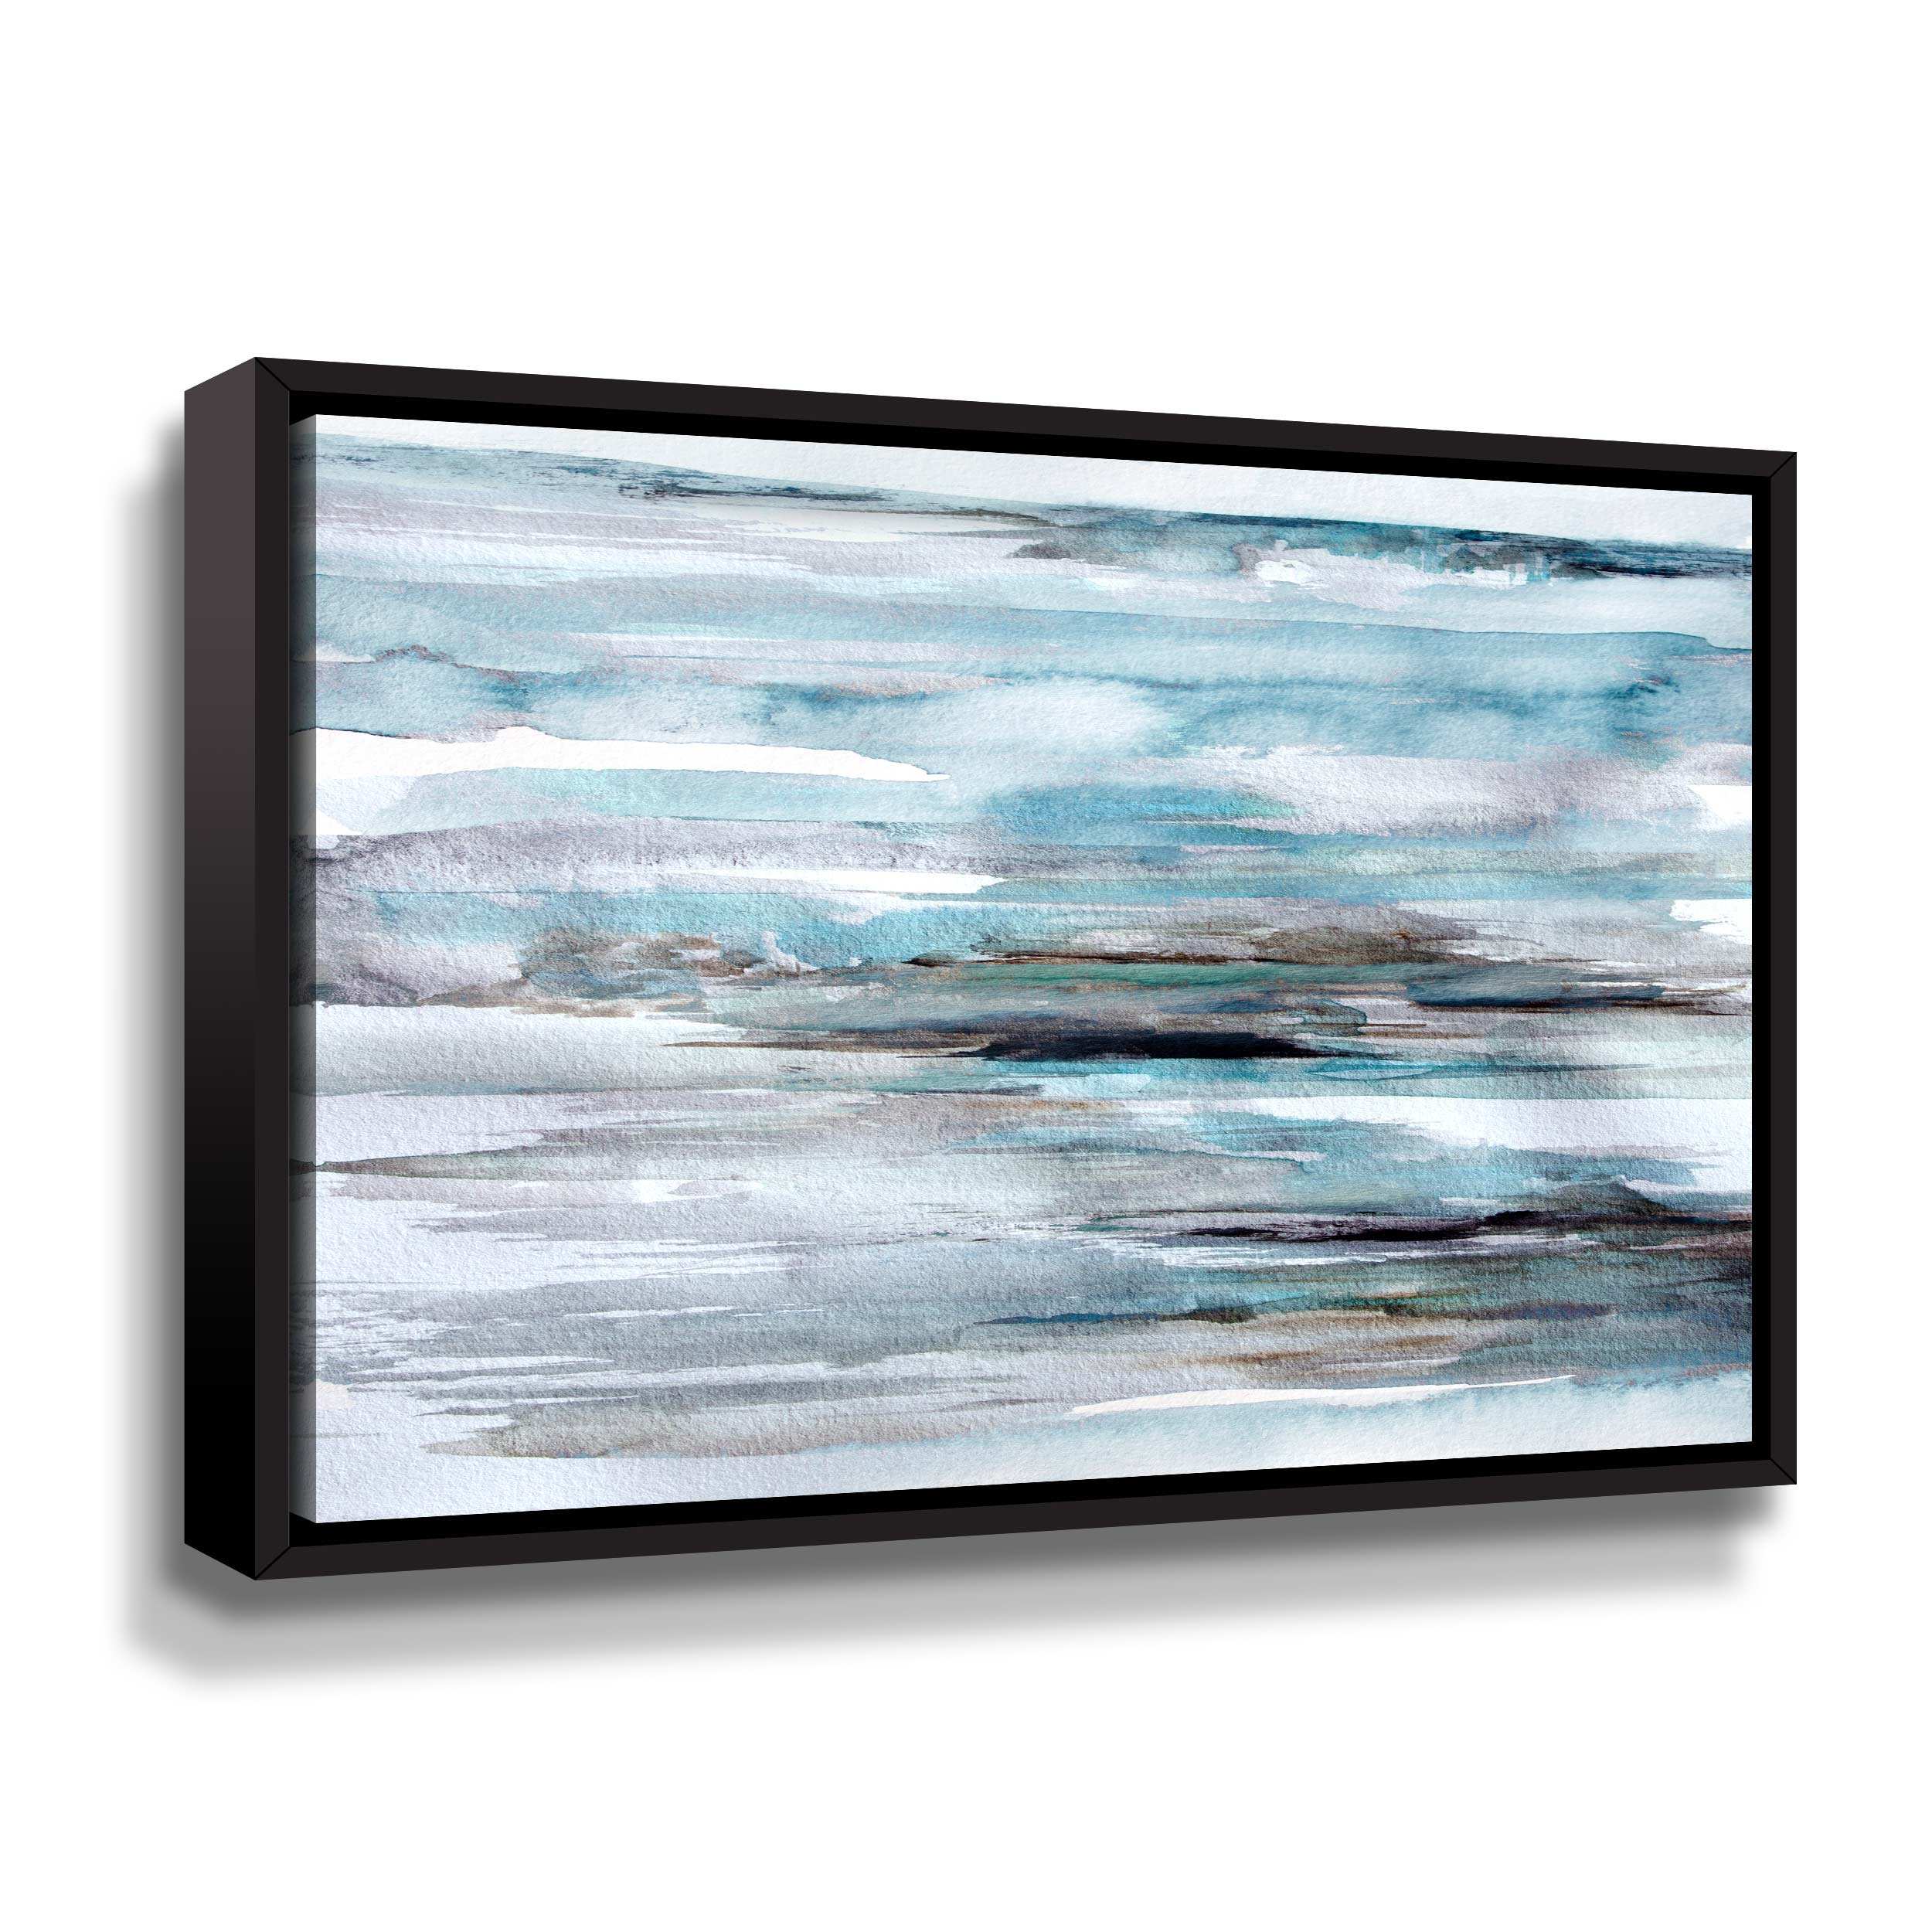 Nordic Skies Gallery Wrapped Floater-framed Canvas